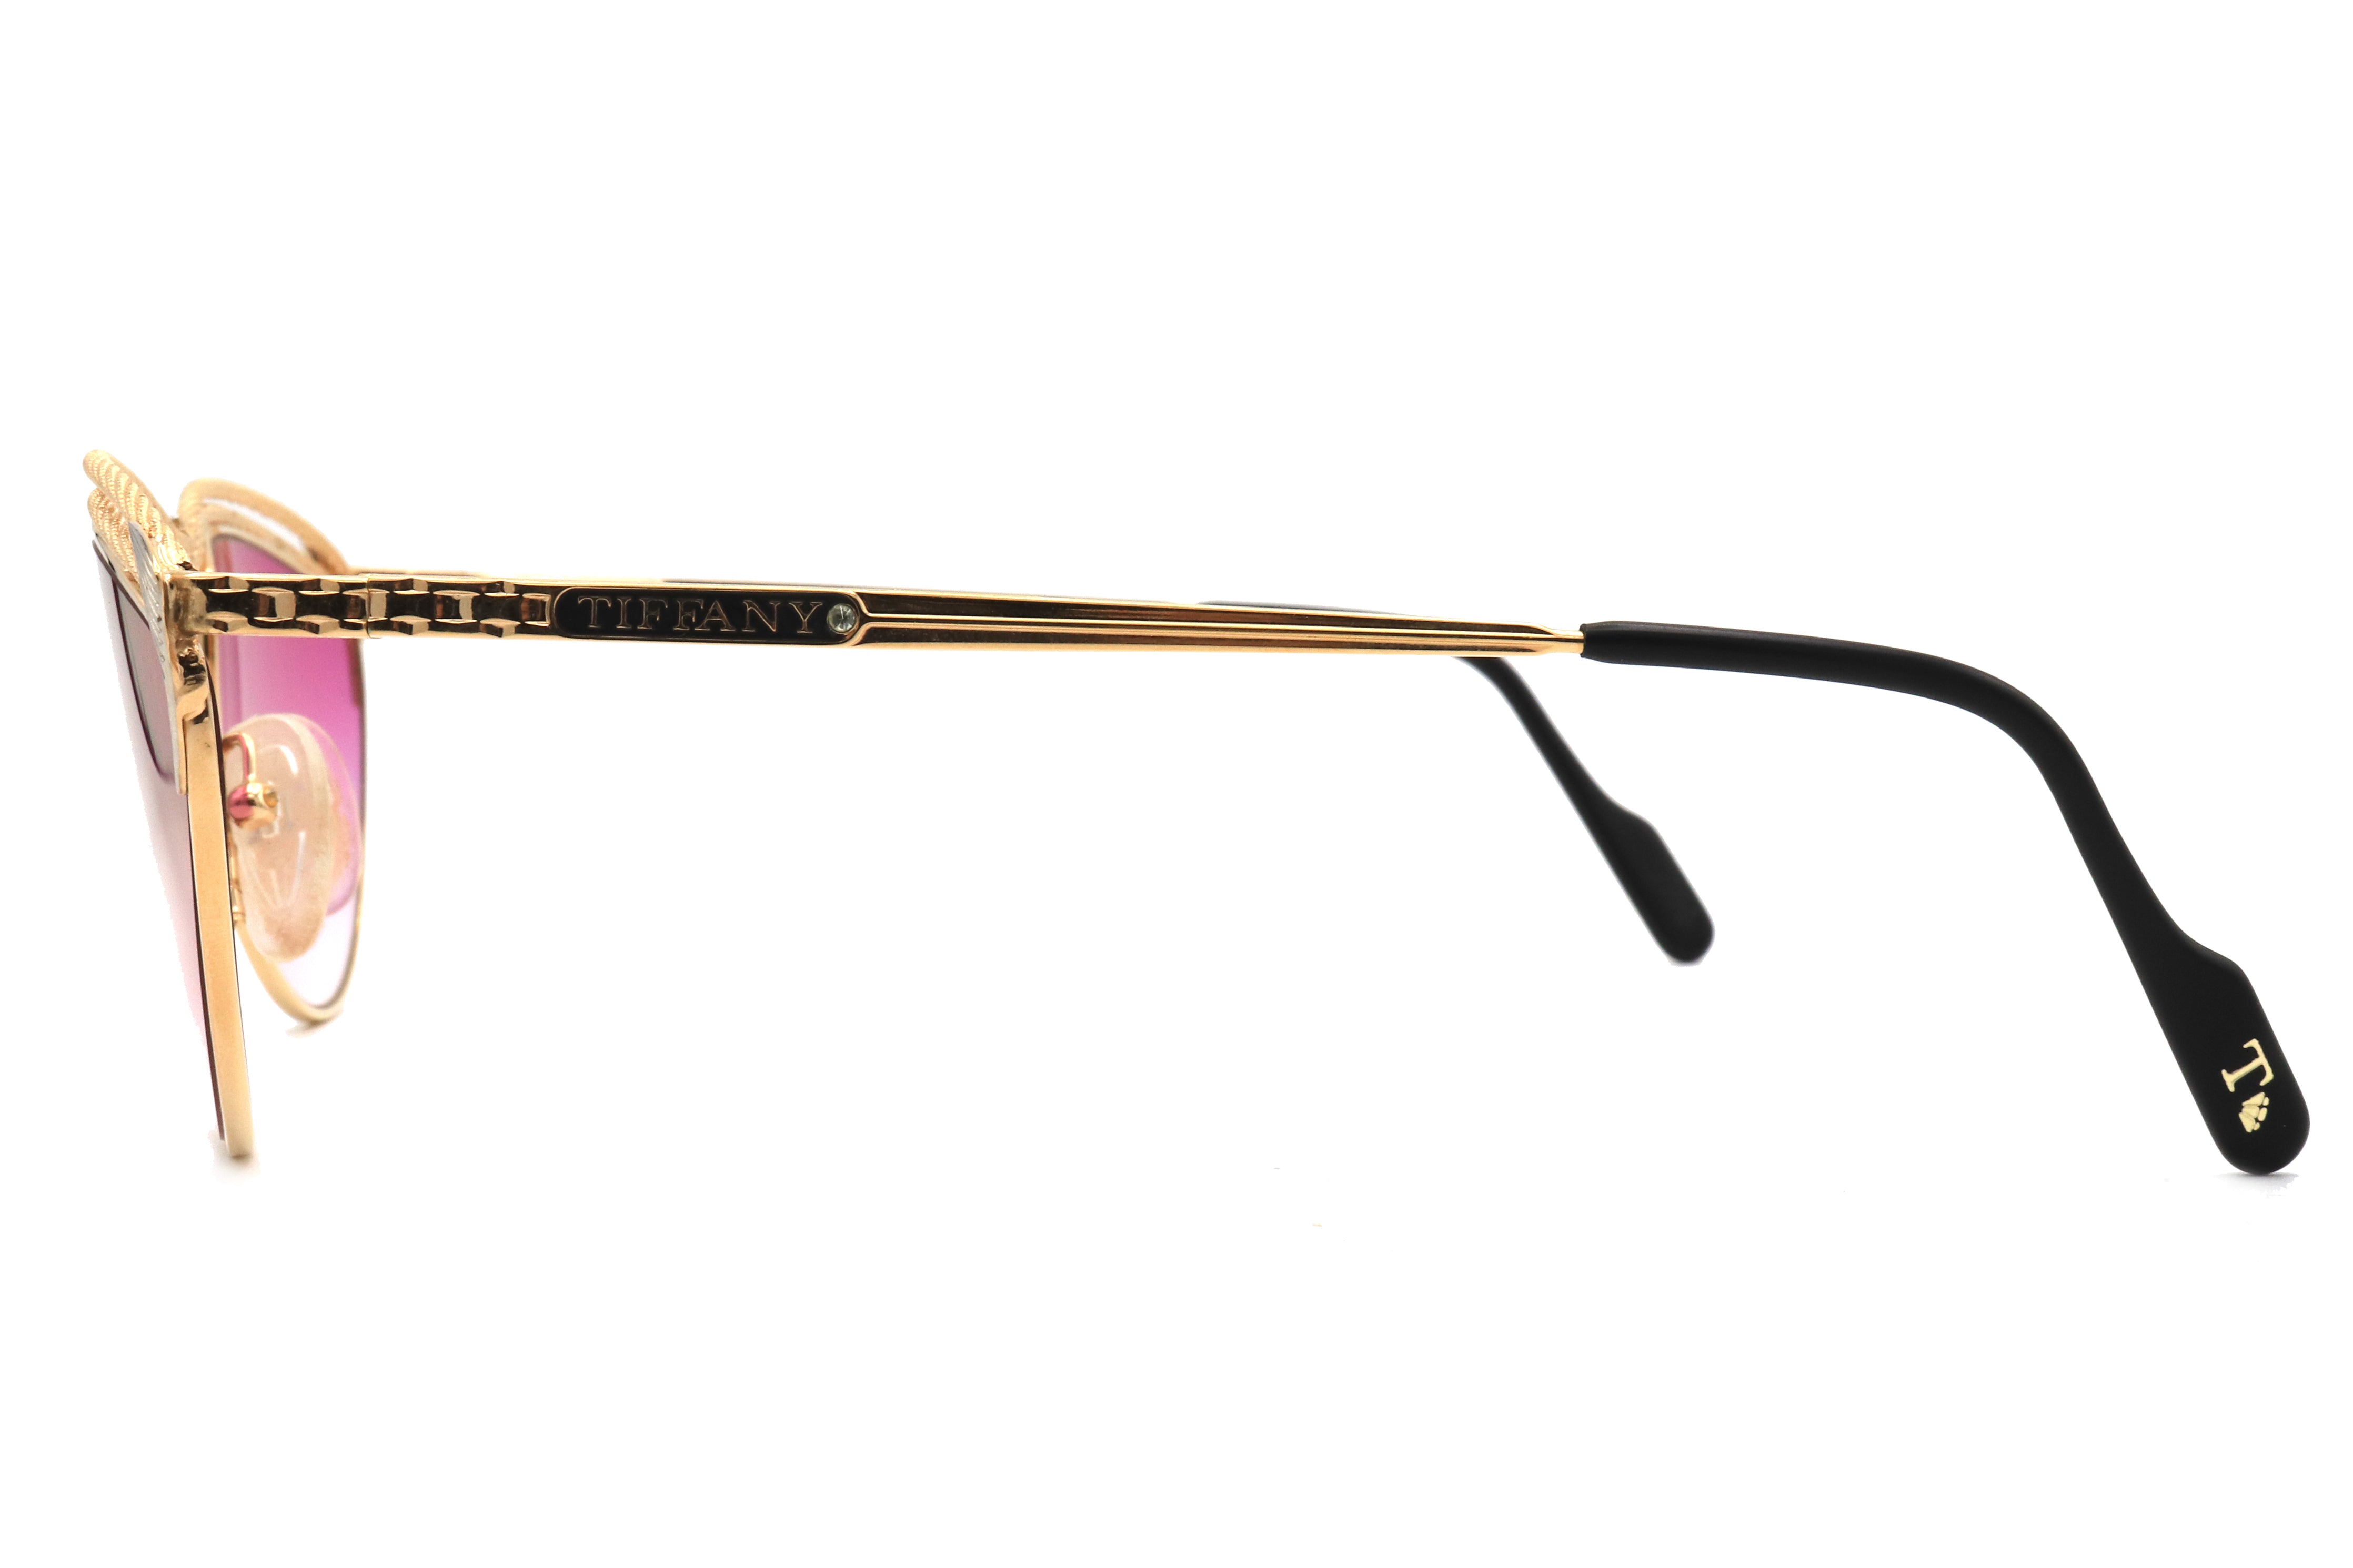 TIFFANY LUNETTES T48 – Hall of Frames Company